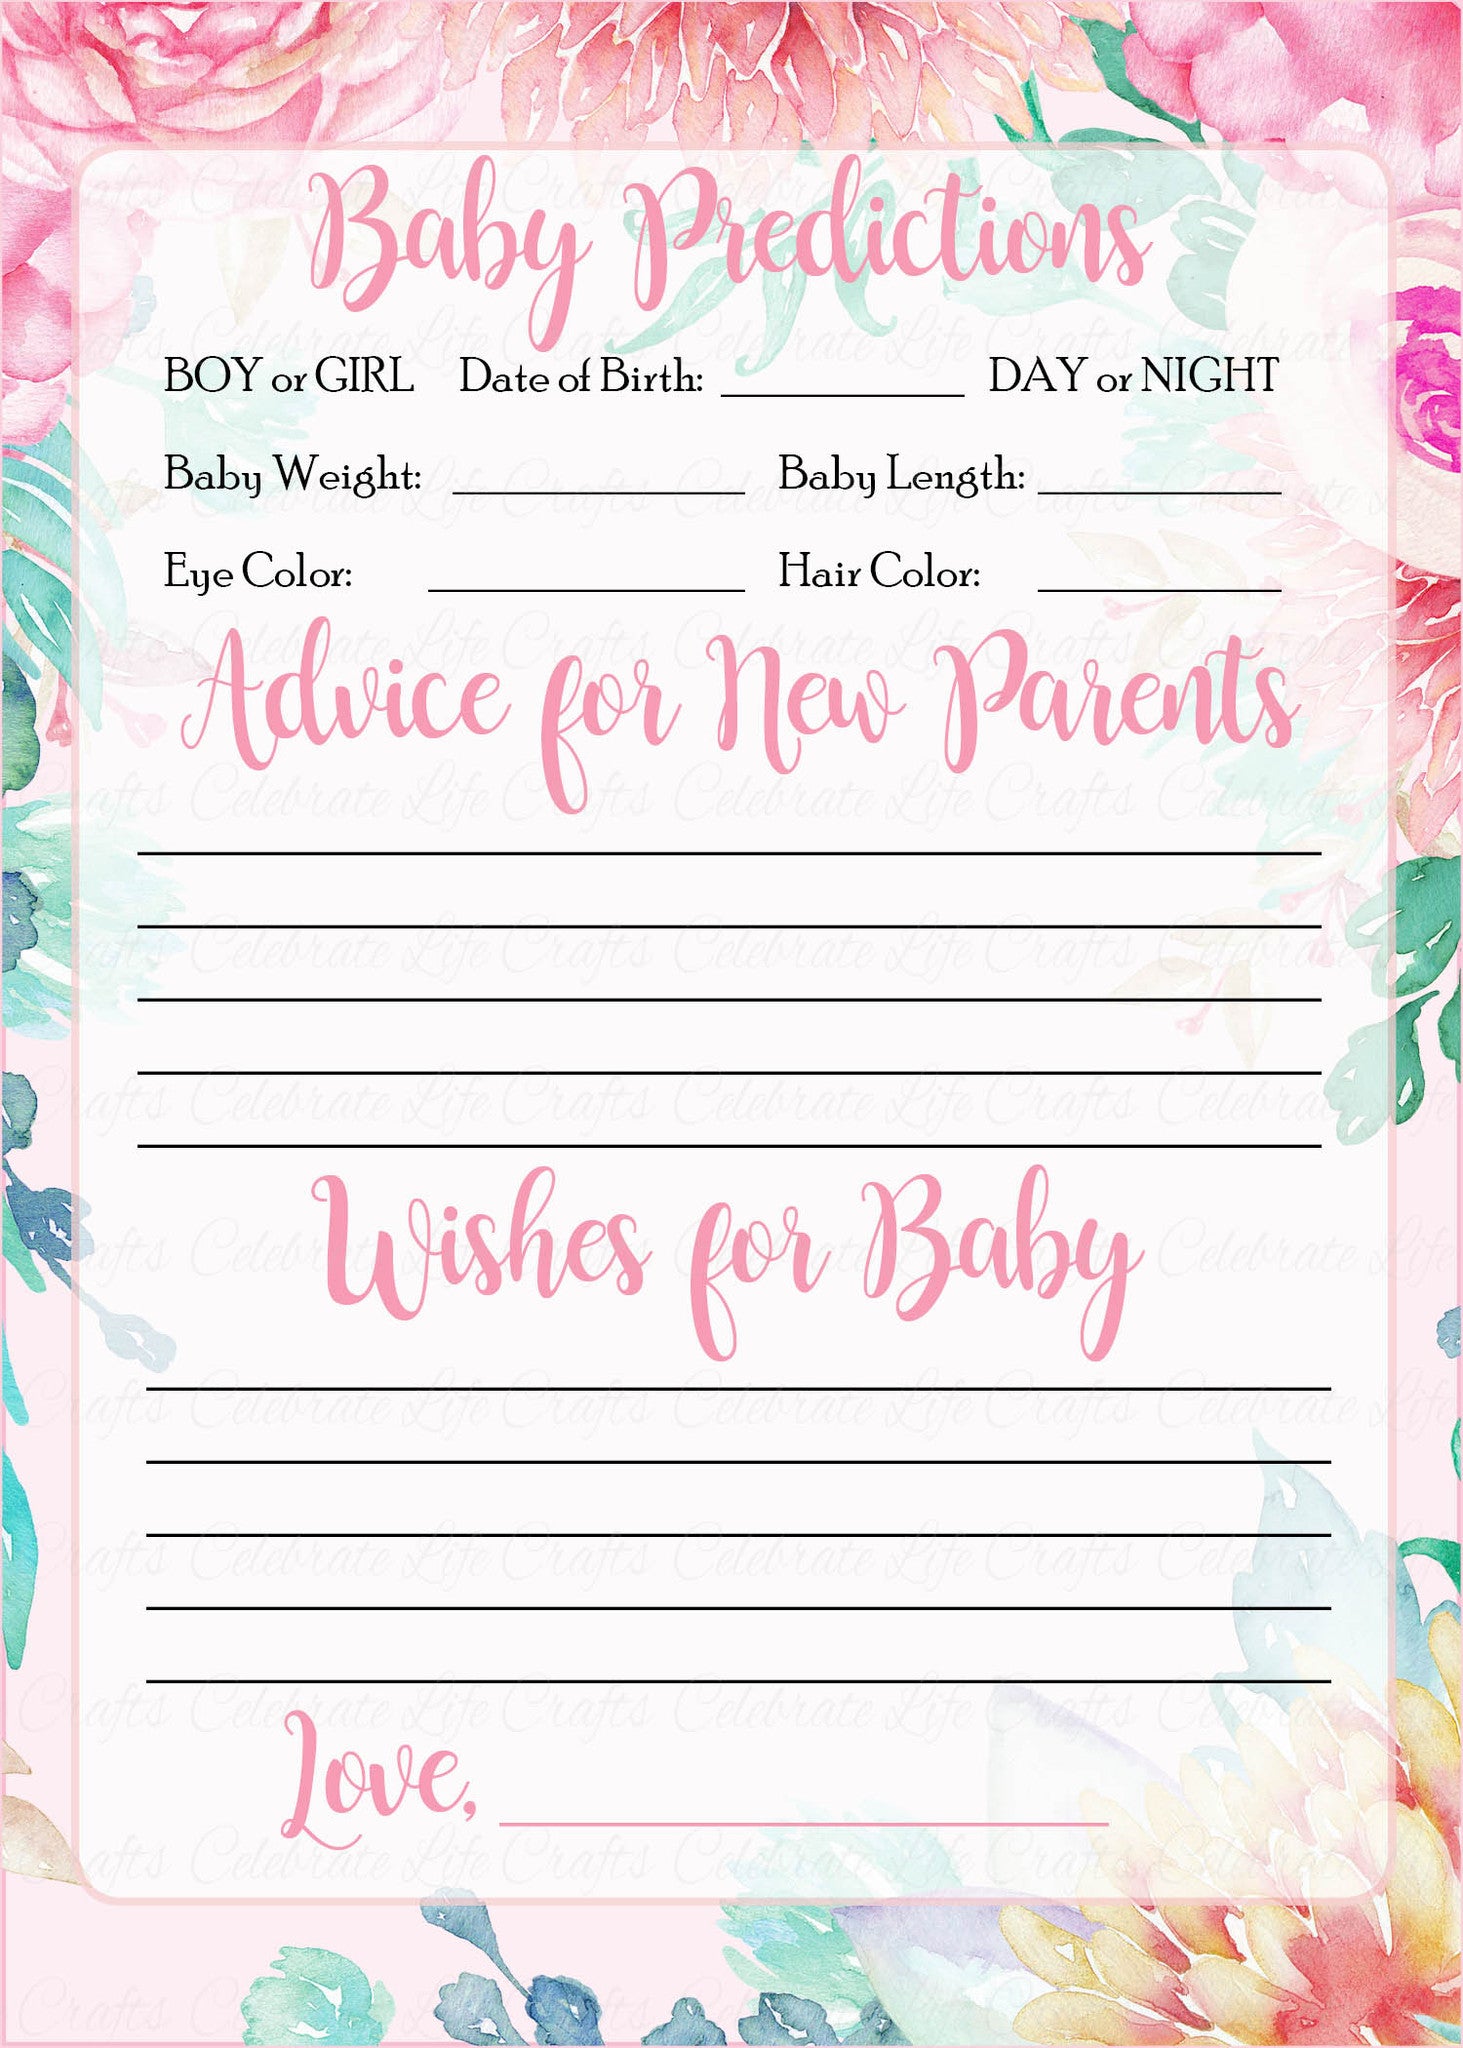 prediction-advice-baby-shower-activity-spring-baby-shower-theme-for